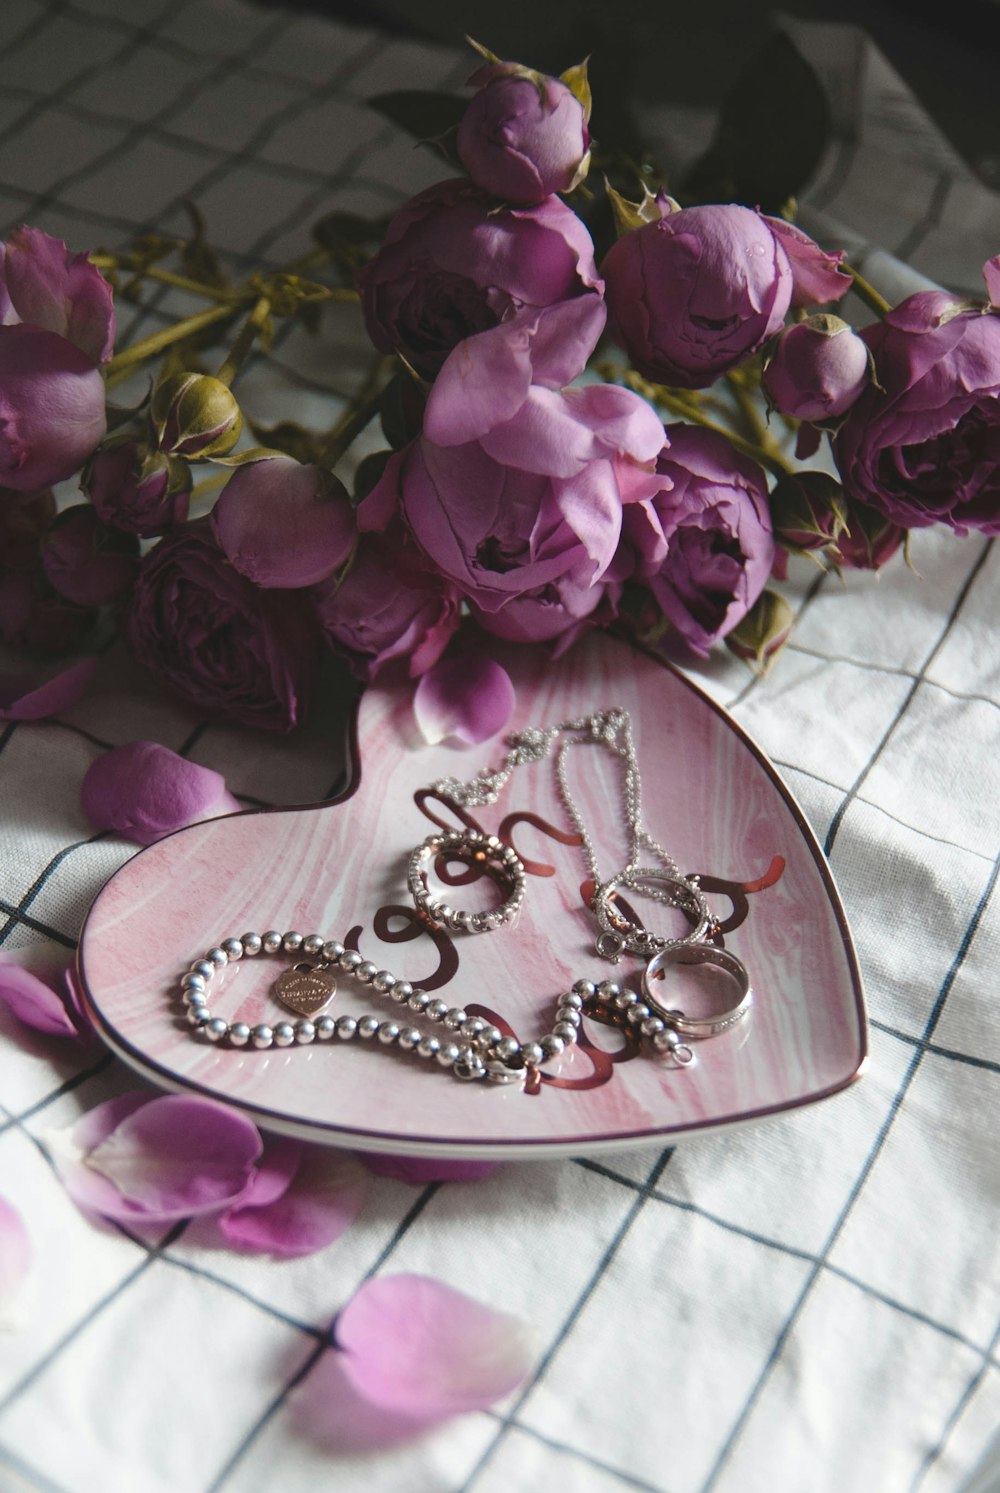 silver-colored rings and bracelet on plate with pink roses